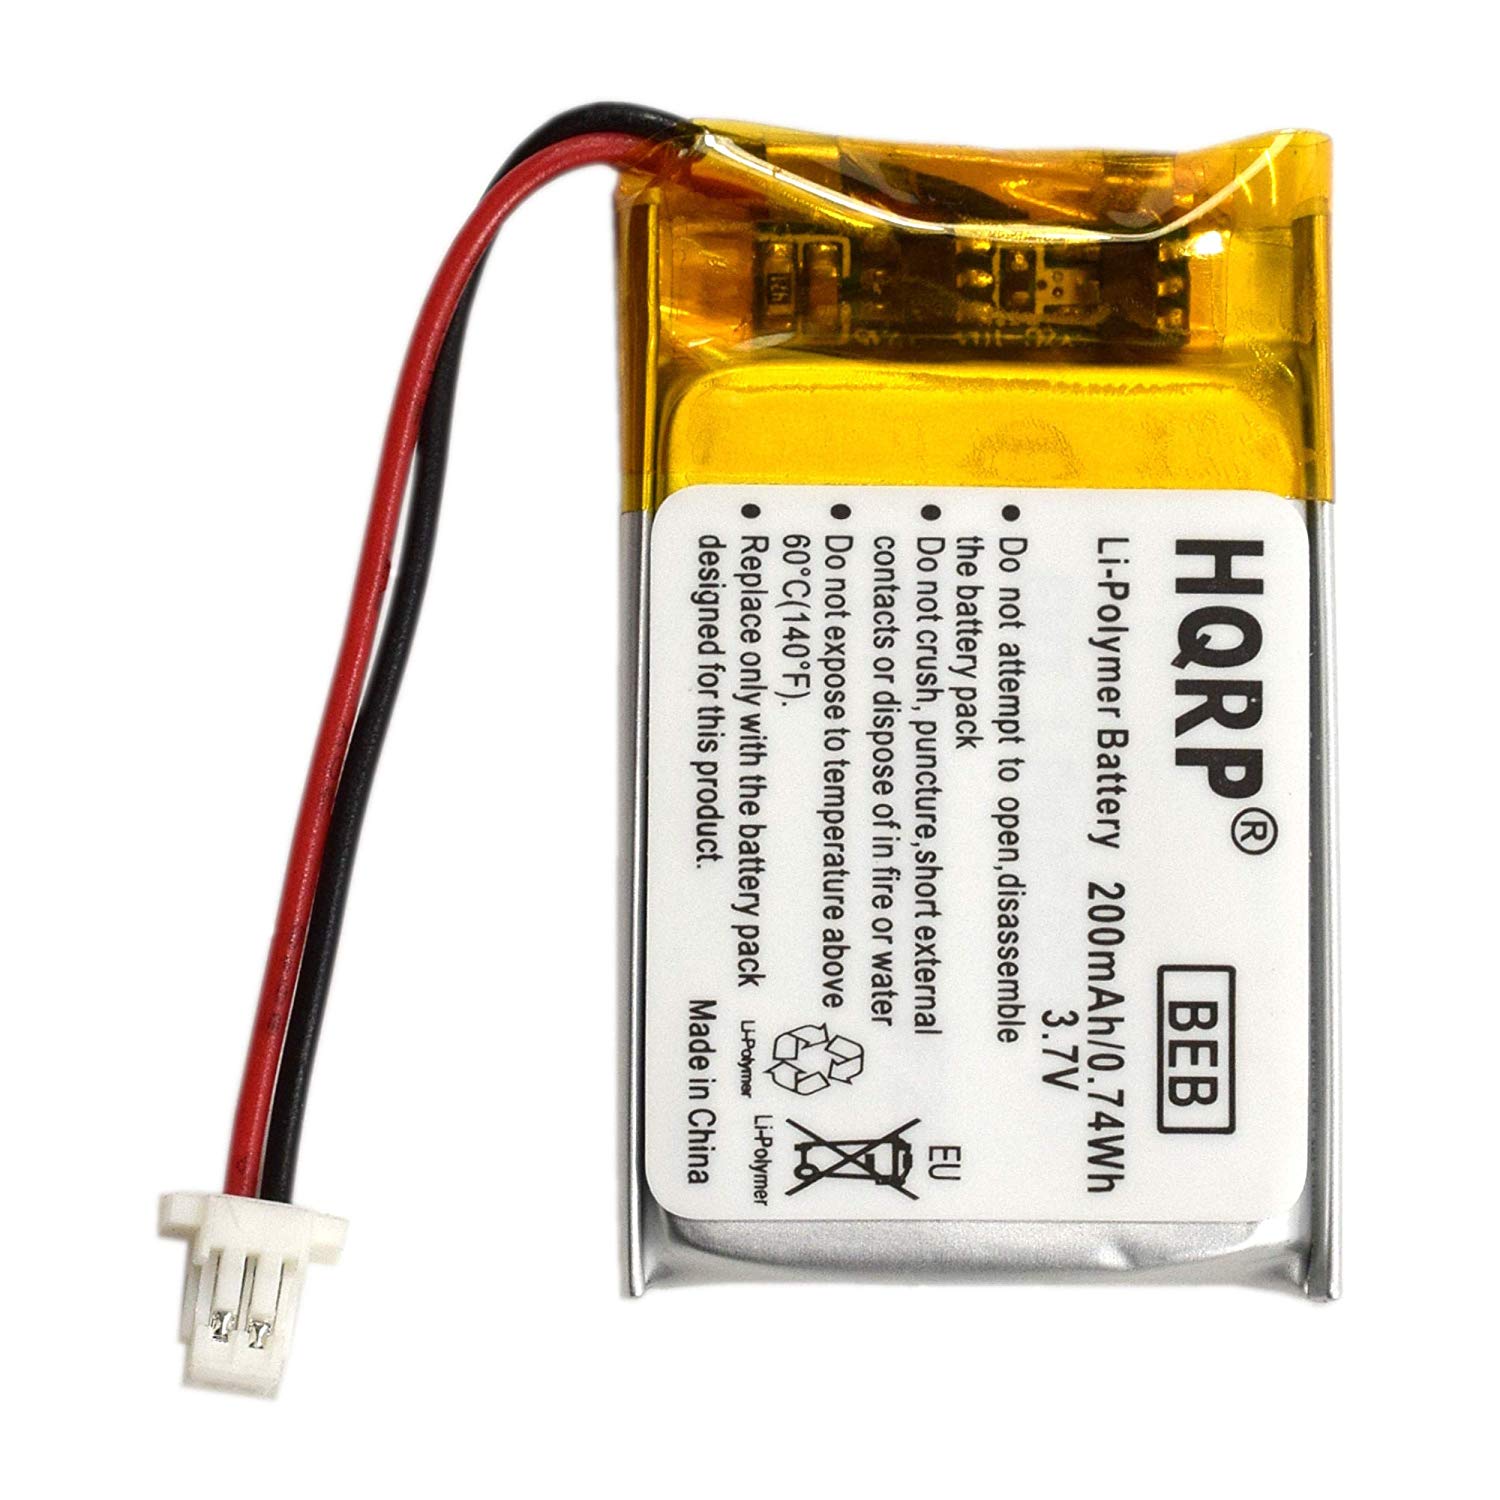 HQRP 887774410131904 Battery Works with Clifford 7756X 3706 4706 5706